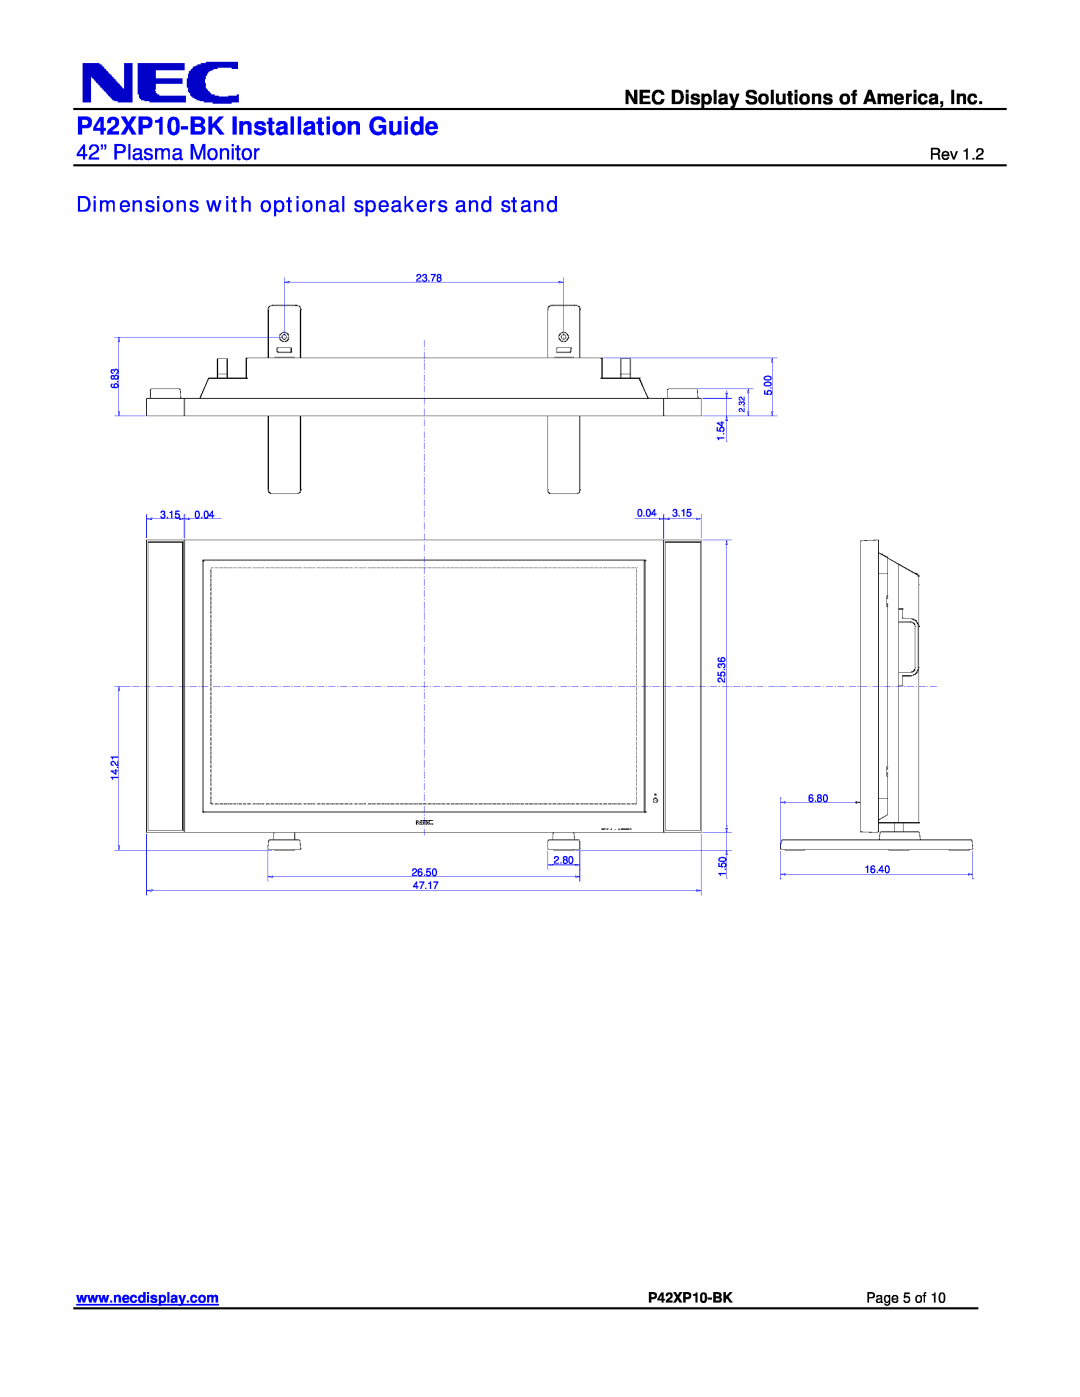 NEC dimensions Dimensions with optional speakers and stand, P42XP10-BK Installation Guide, 42” Plasma Monitor, Page 5 of 